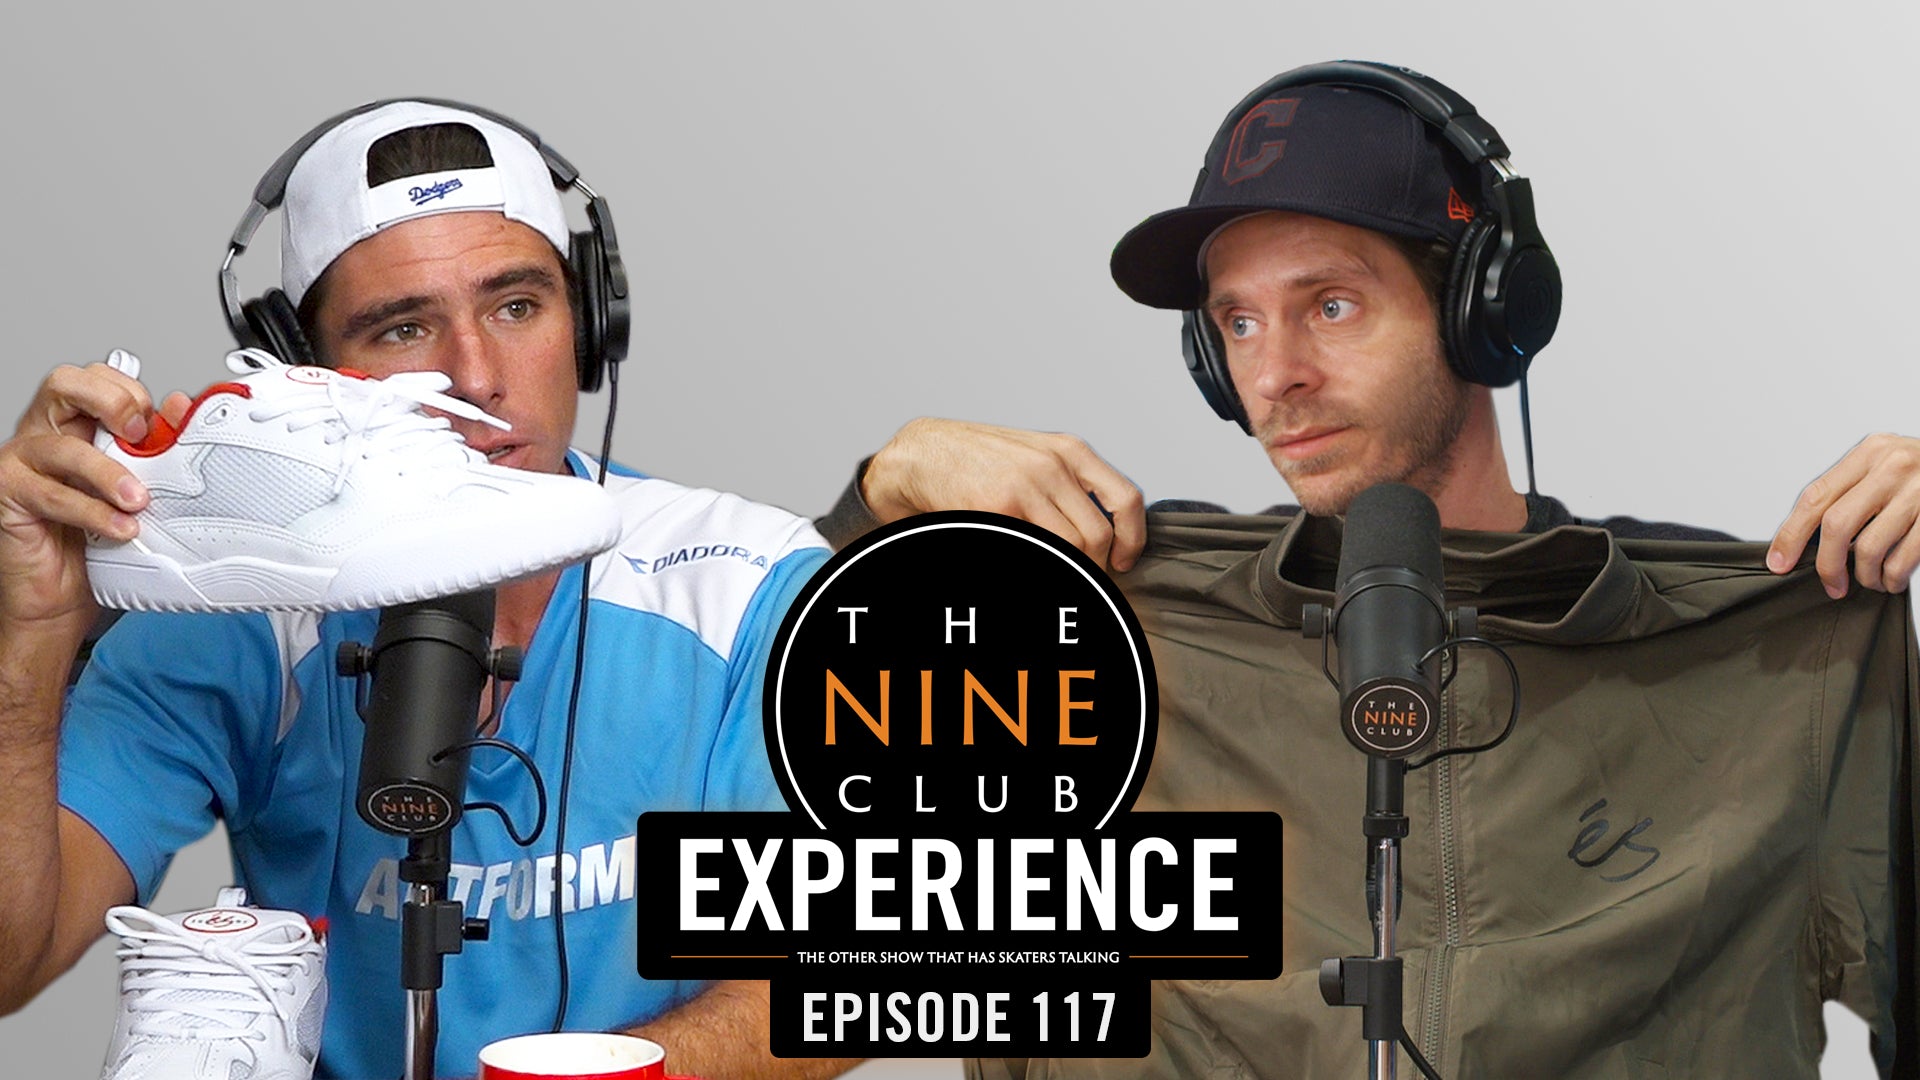 The Nine Club Experience Episode 117